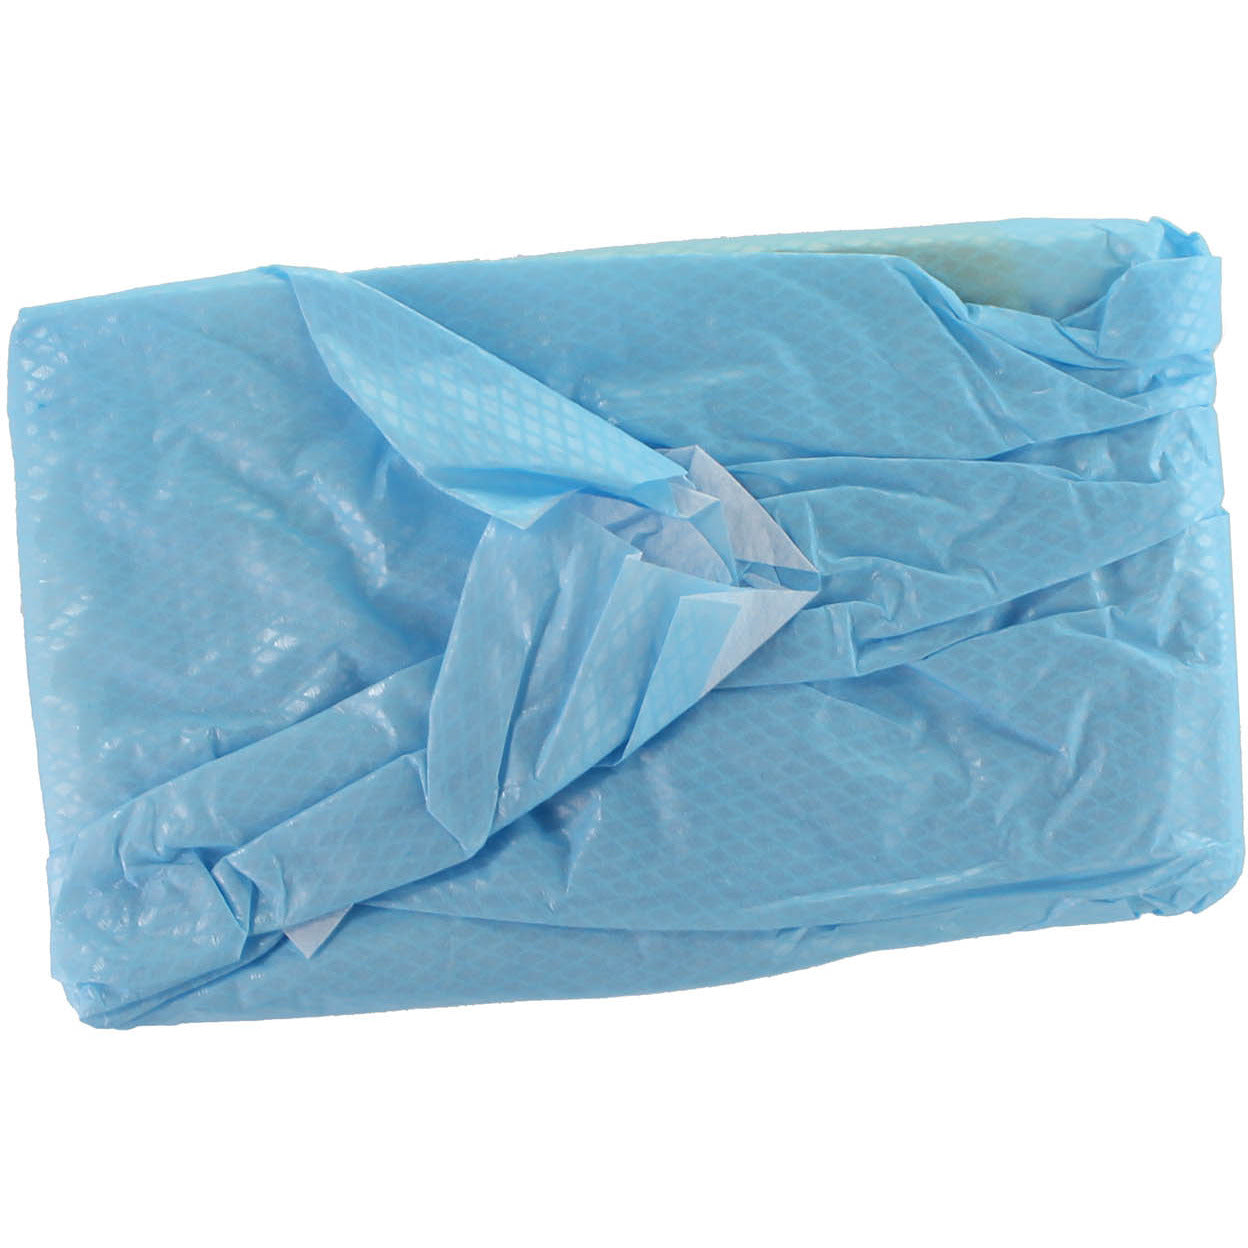 Woundcare Pack, Walleted Large Nitrile Gloves